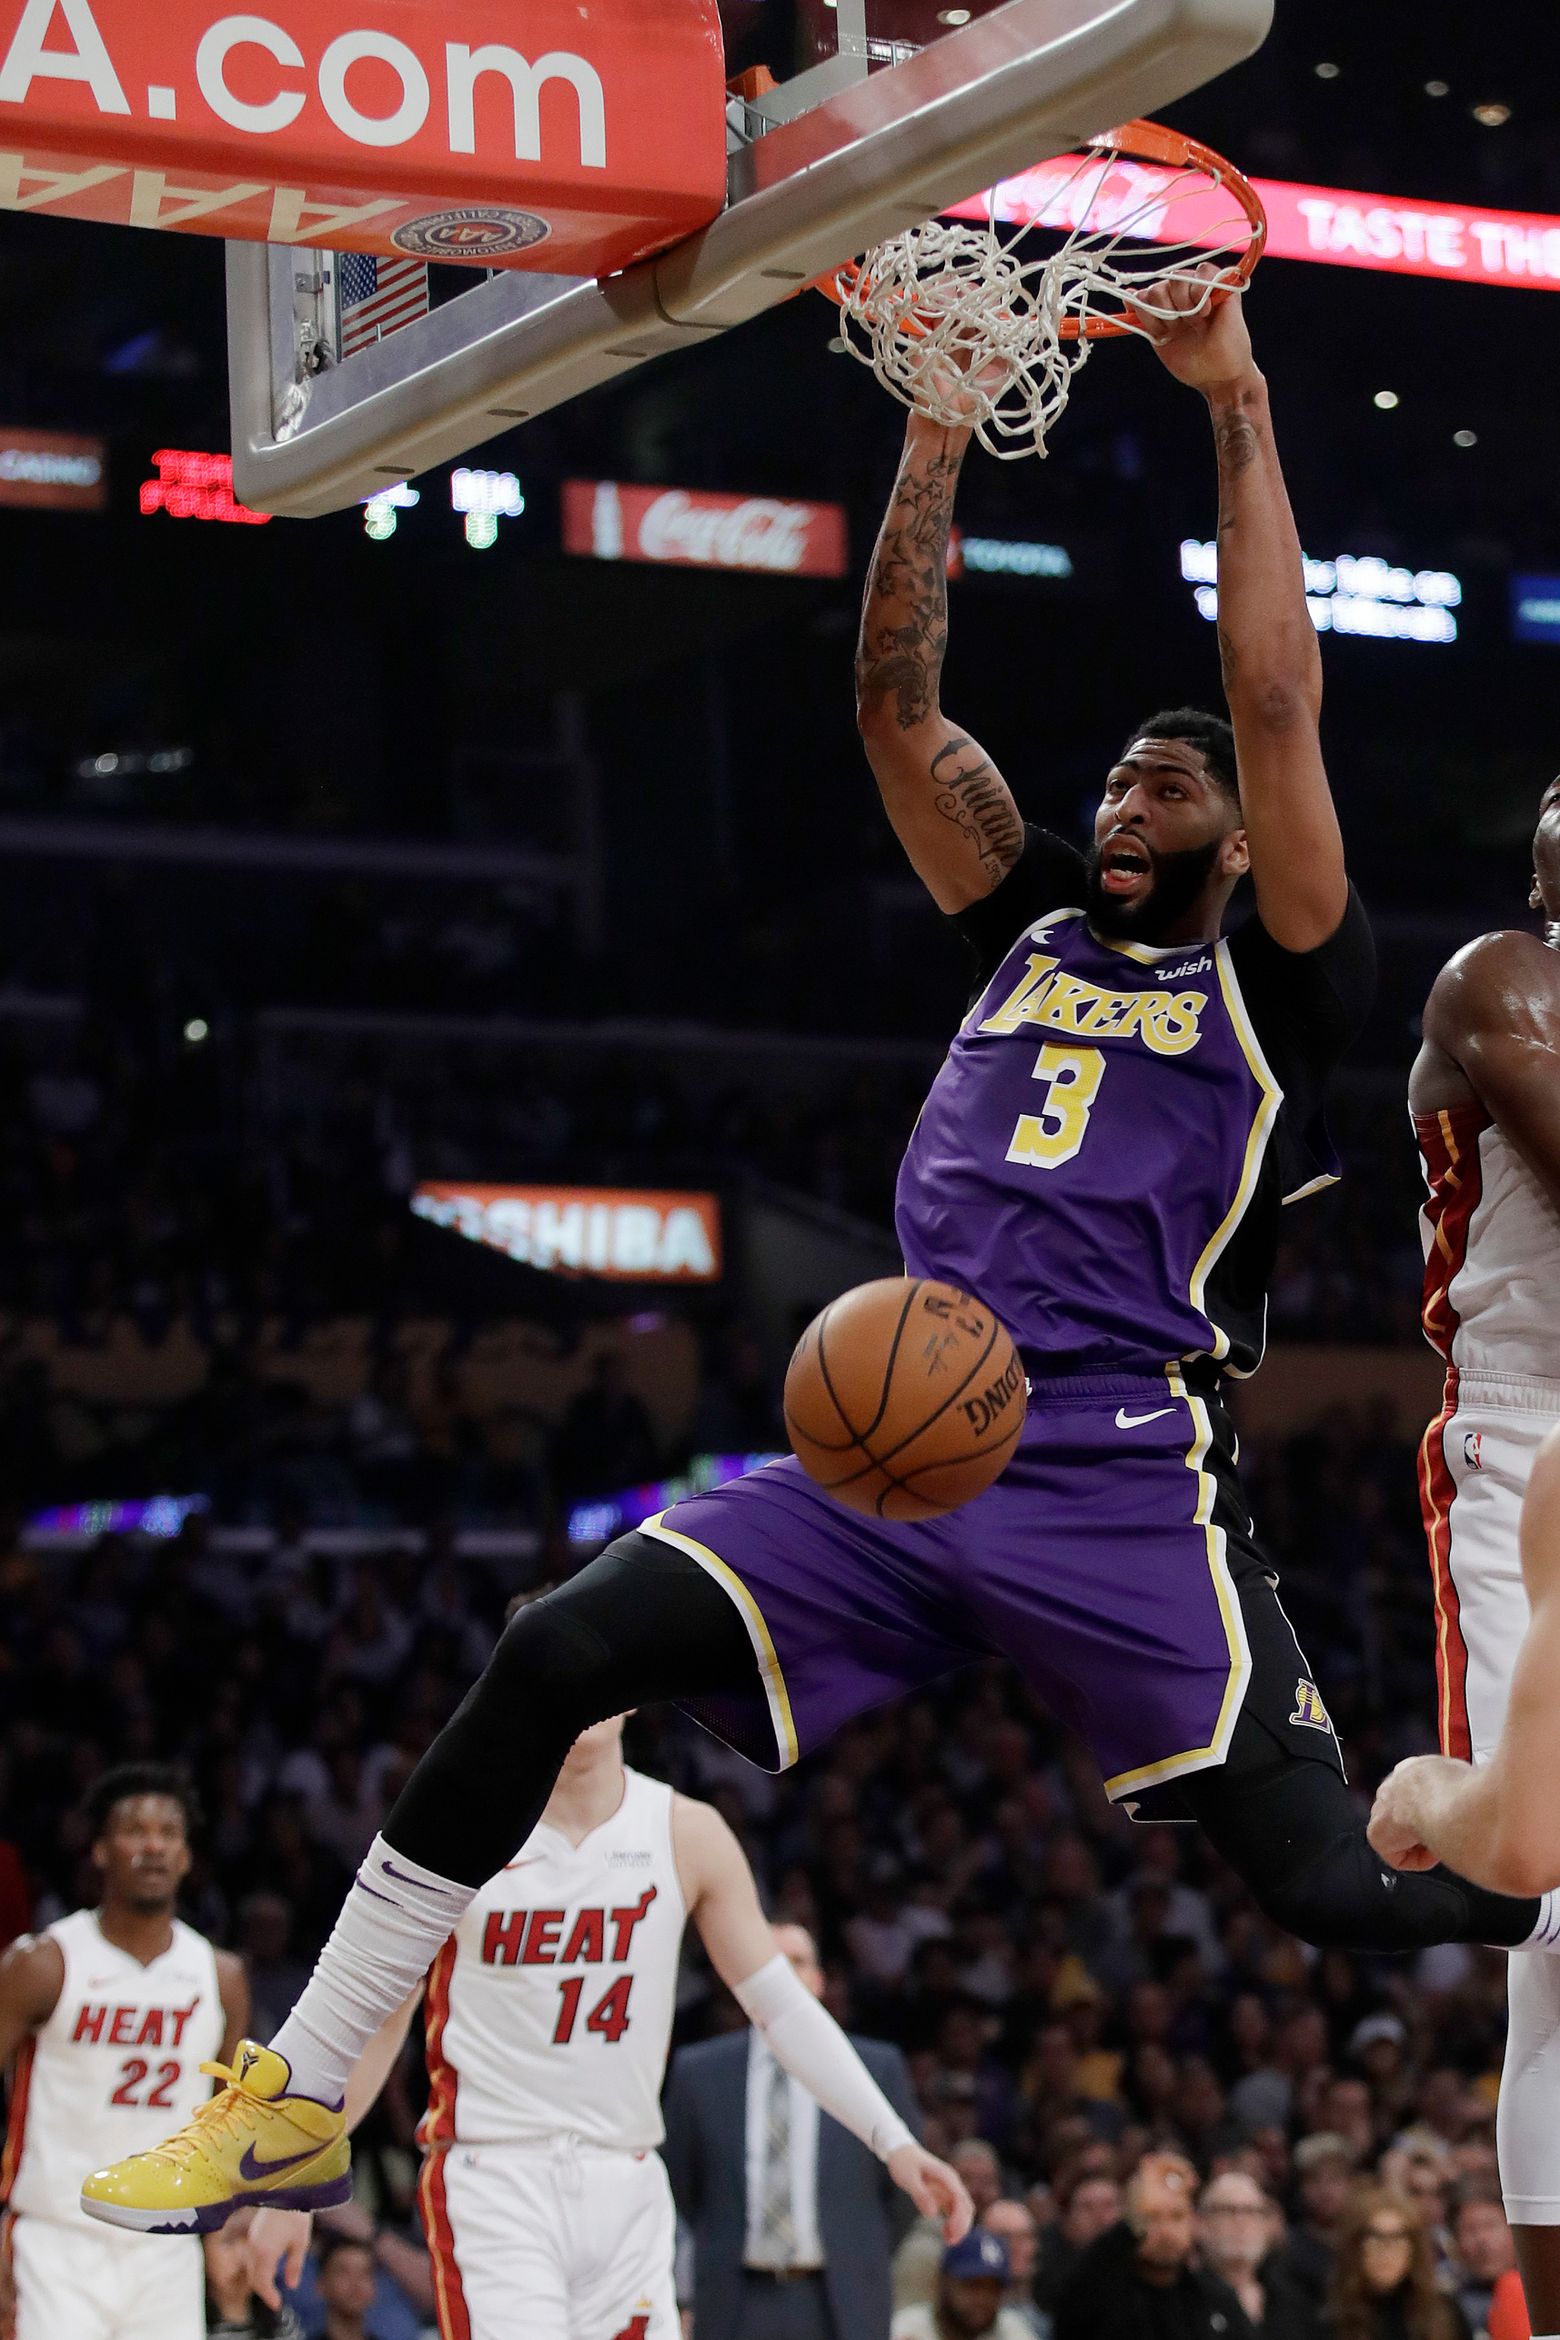 Lakers vs. Heat Final Score: Lakers win mid-off against Miami